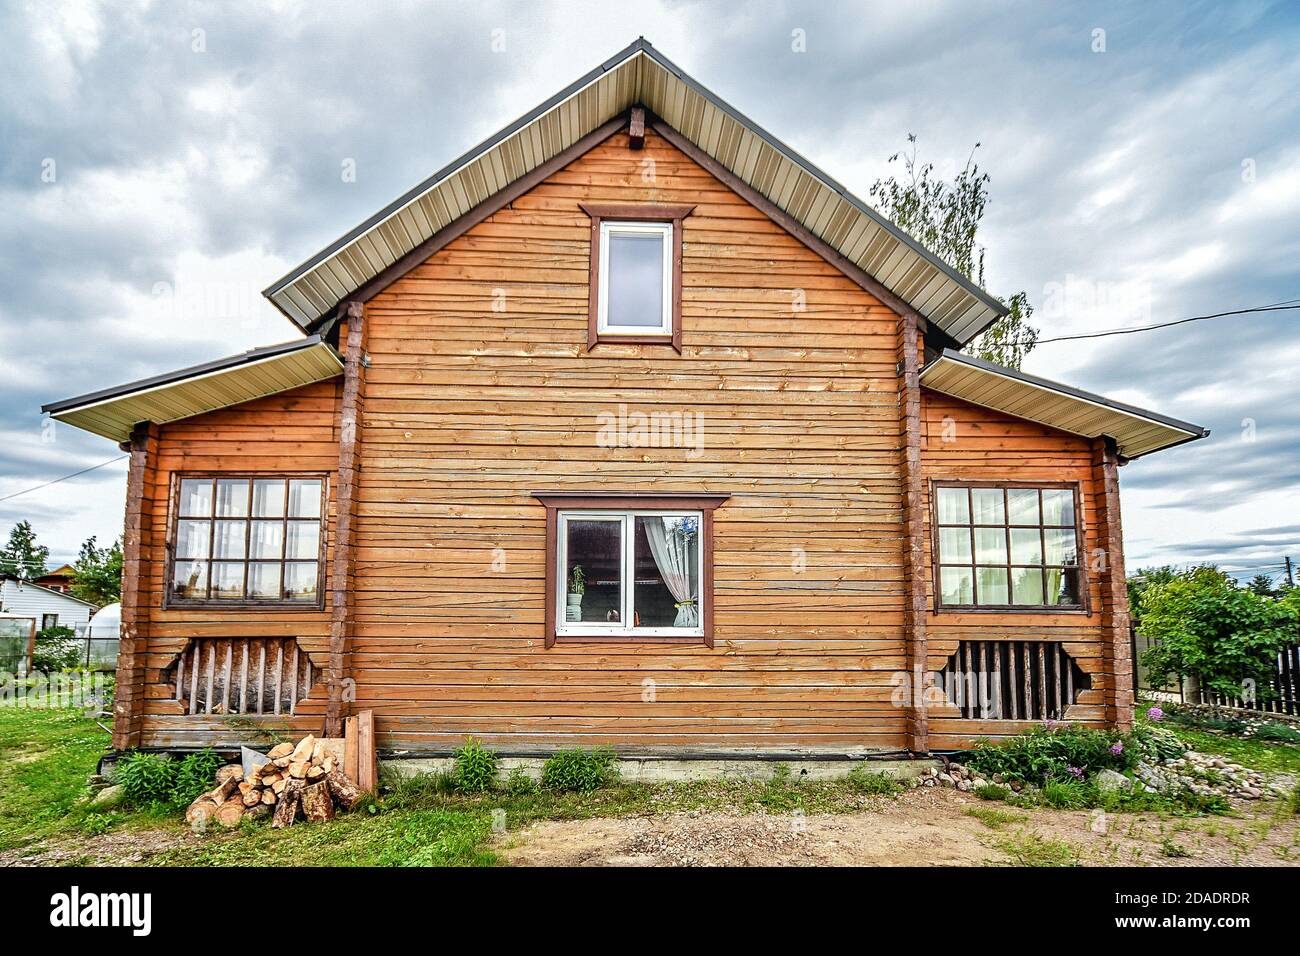 Rustic two-story wooden house, Country life in the summer. Russia Stock Photo